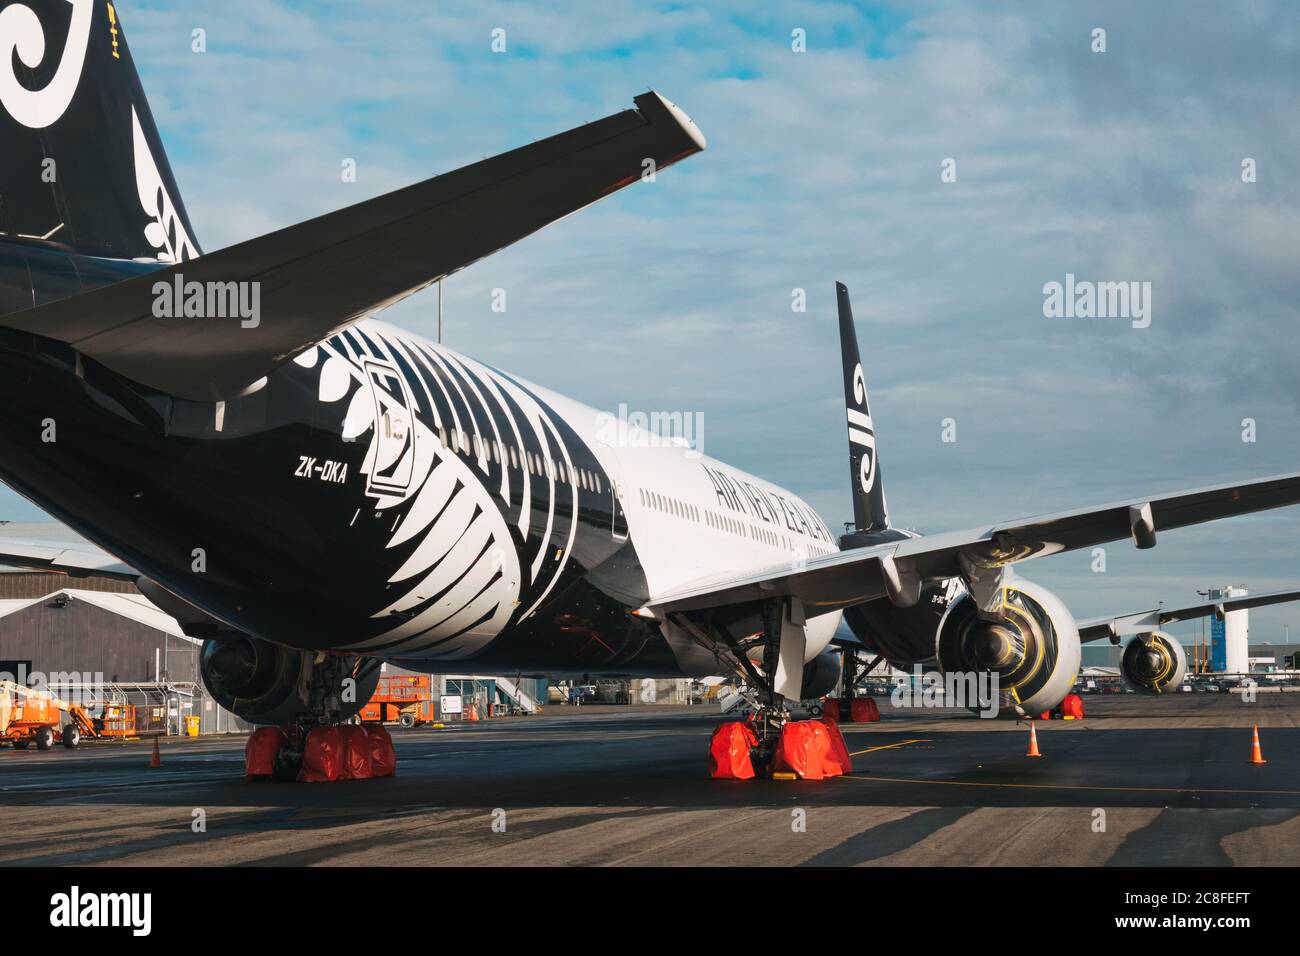 Boeing 777 aircraft in storage at Christchurch Airport, New Zealand, during the coronavirus pandemic Stock Photo